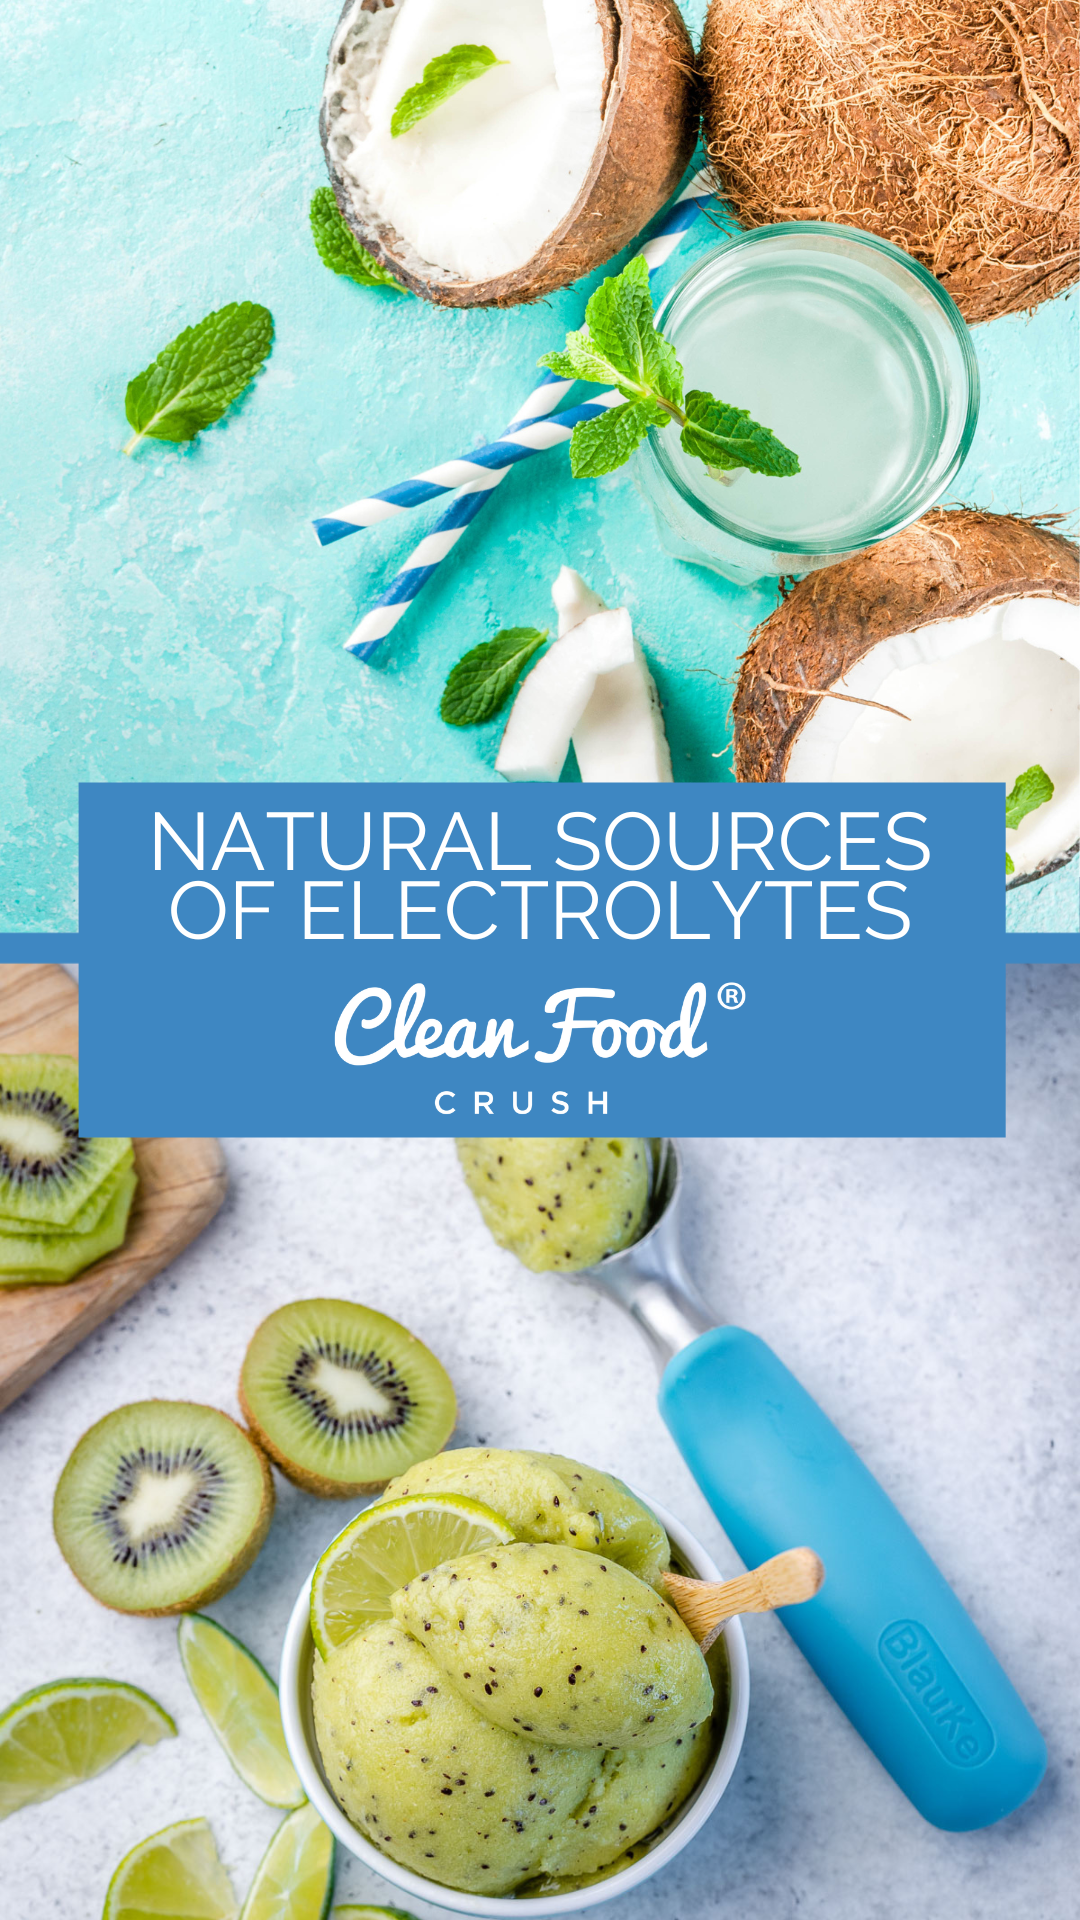 Electrolytes in food: Foods high in electrolytes